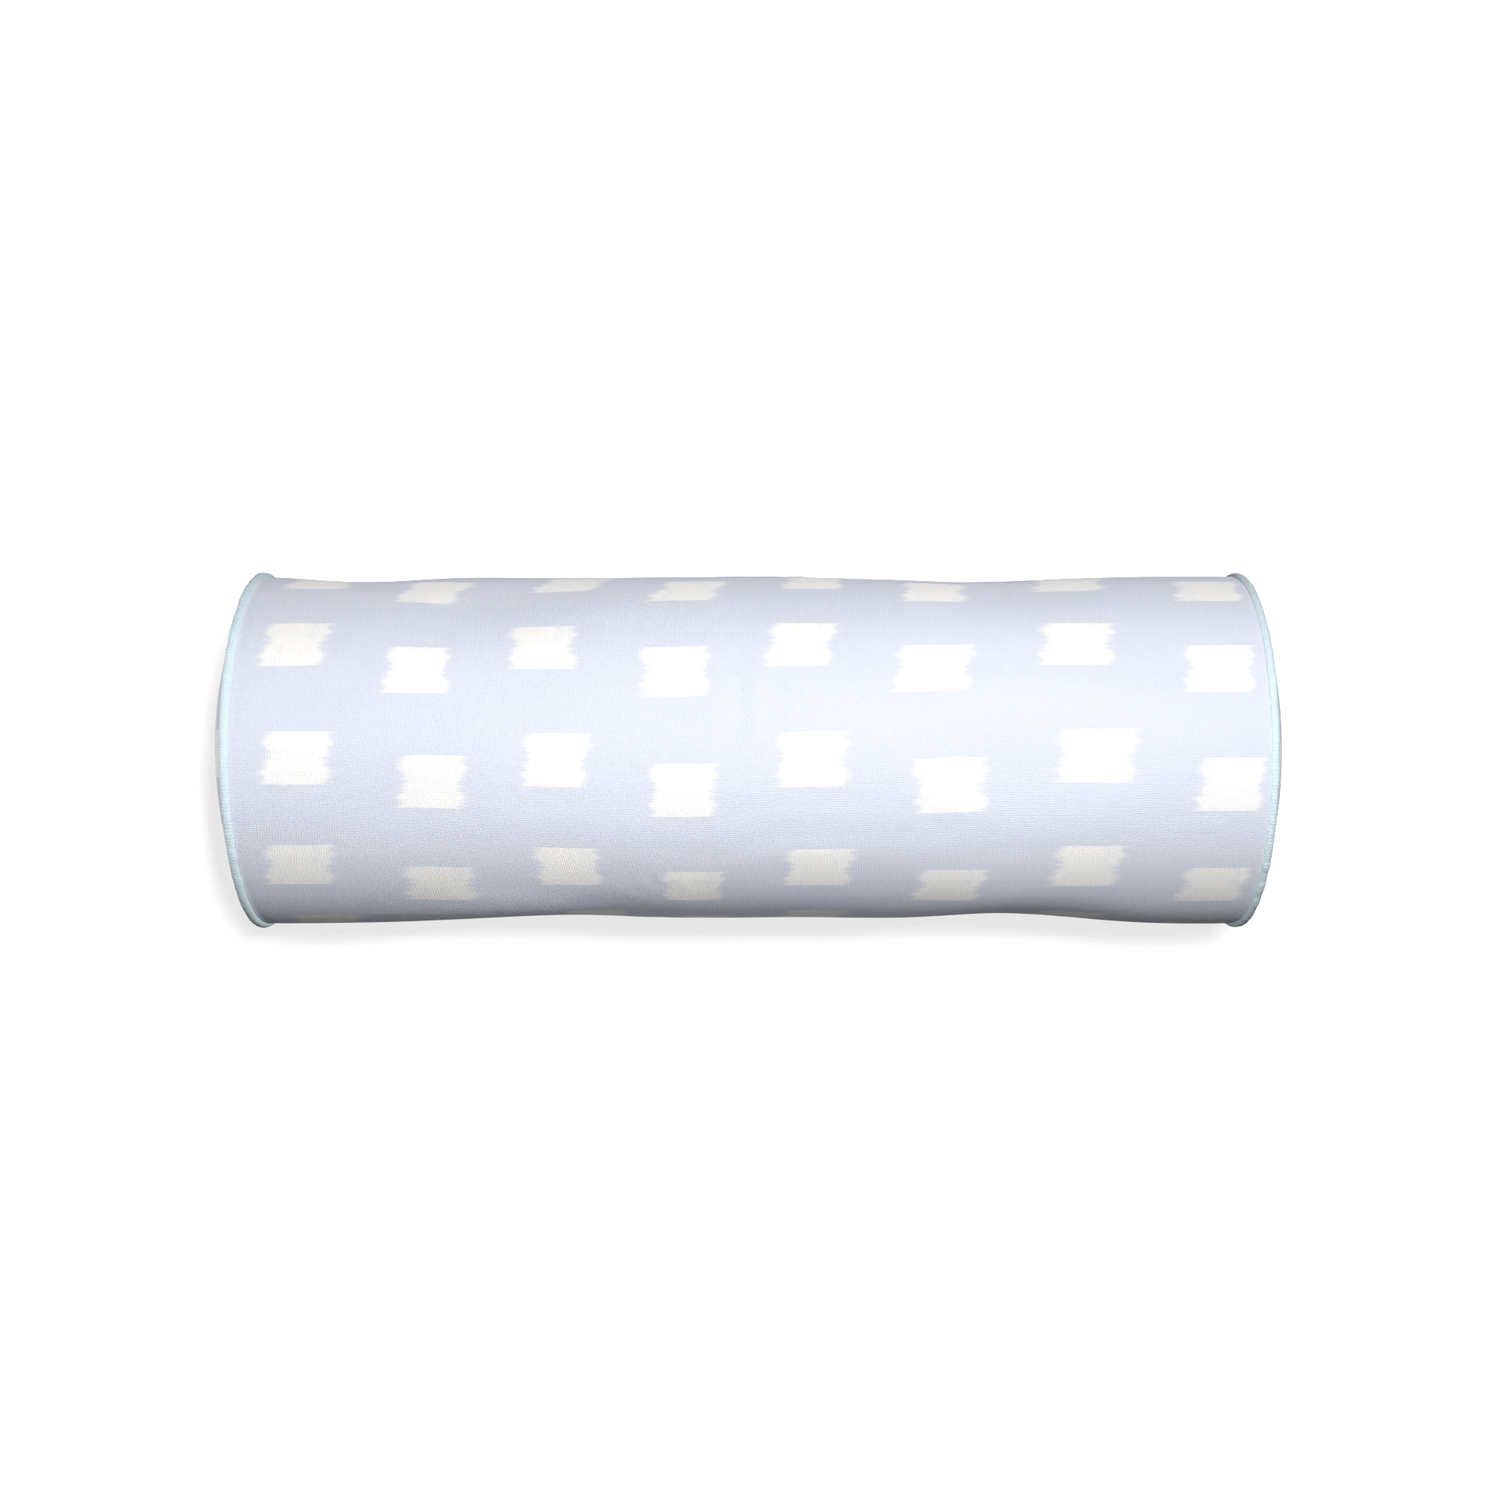 Bolster denton custom pillow with powder piping on white background